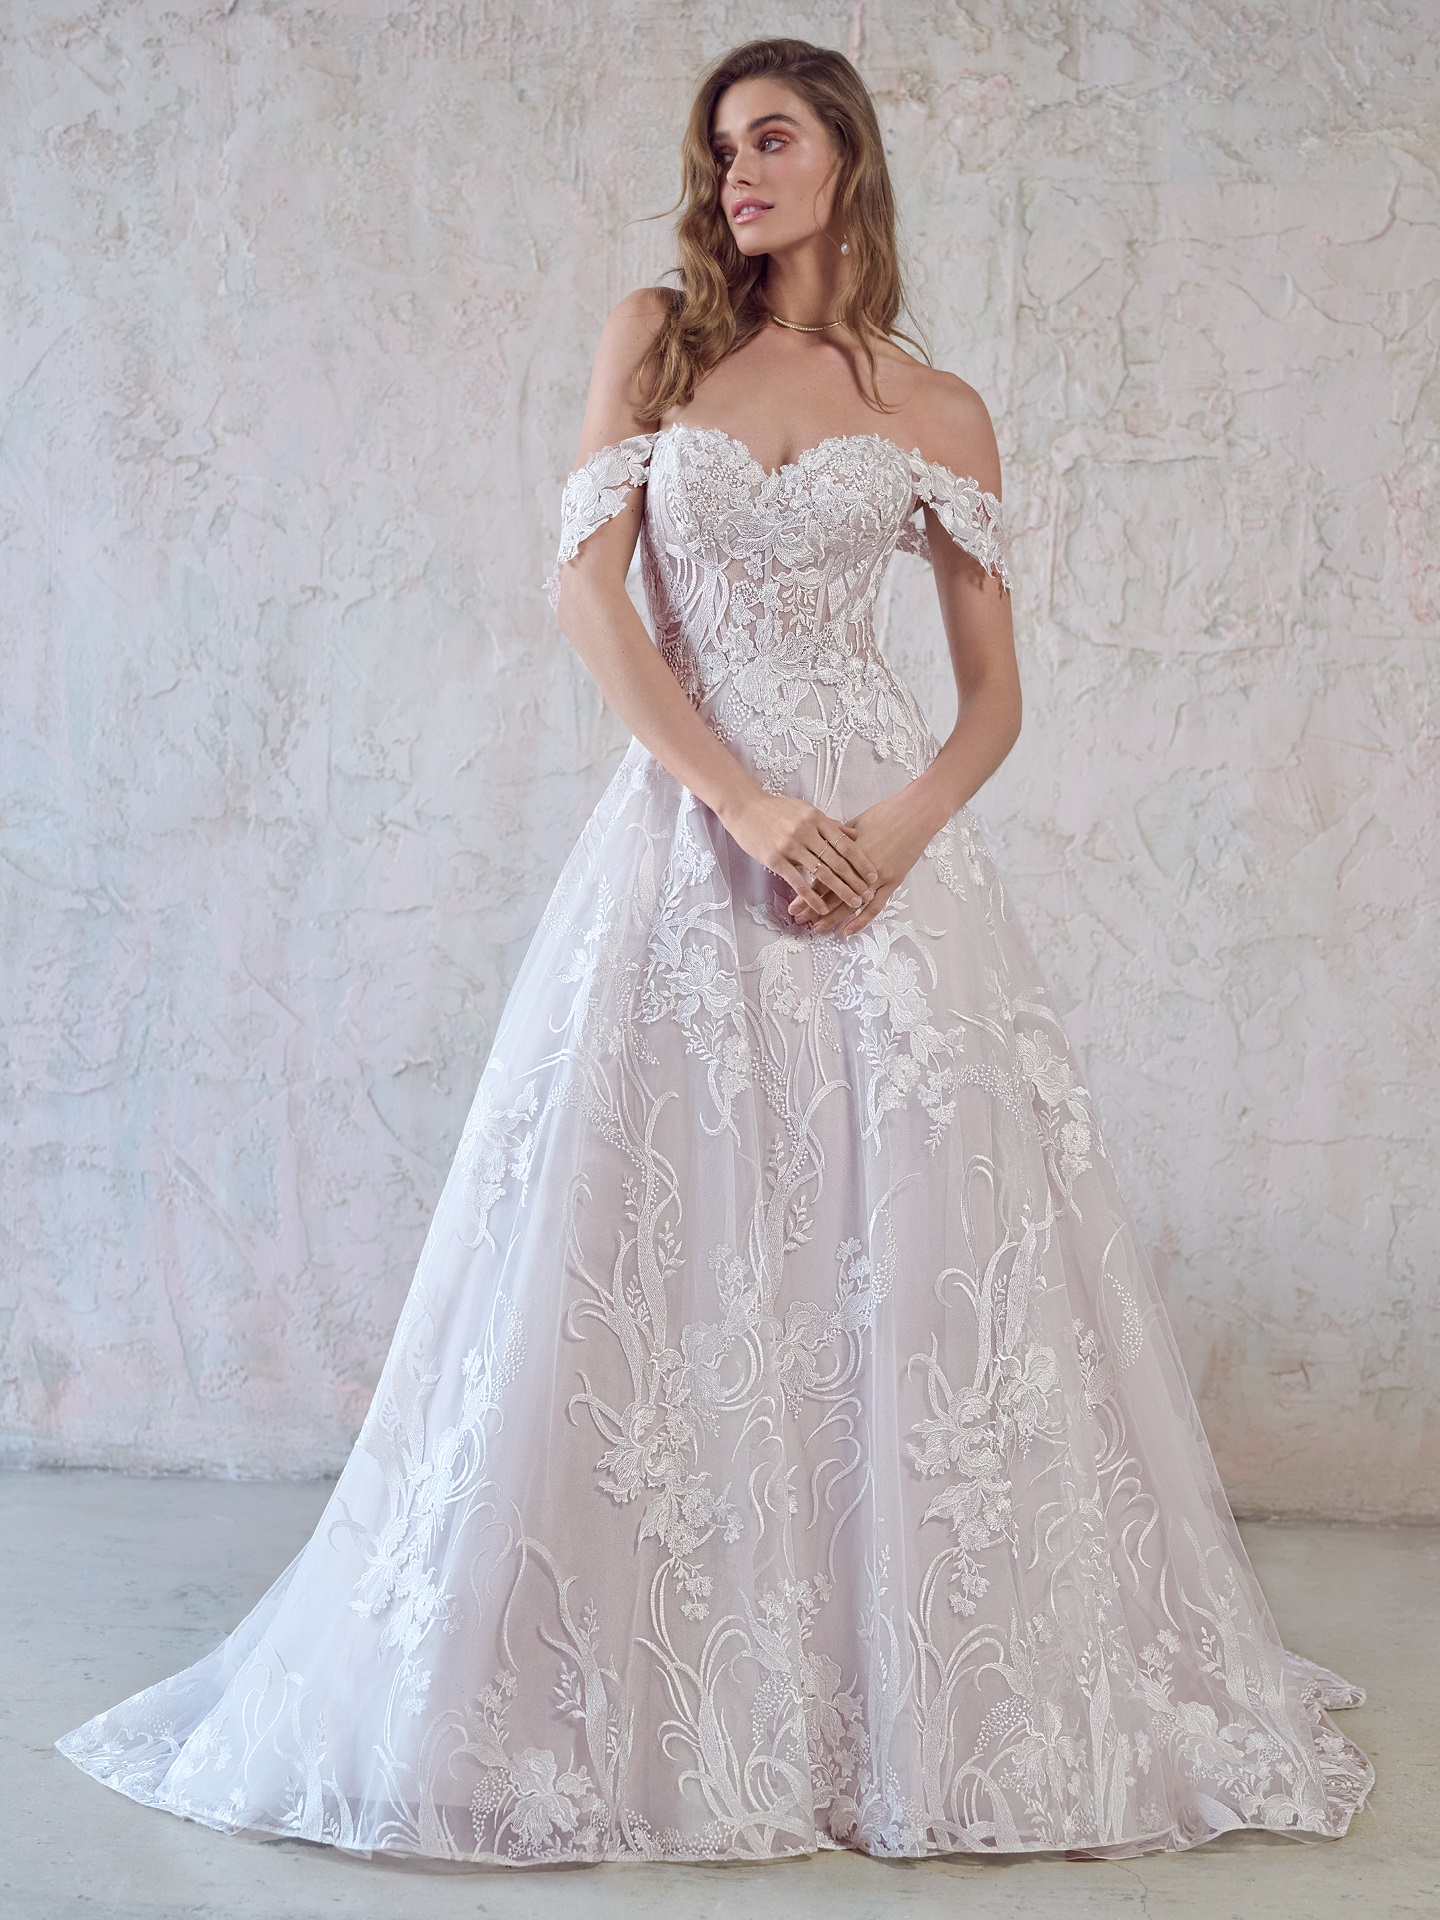 floral lace a line wedding dress from maggie sottero at K&B Bridals in Bel Air Maryland